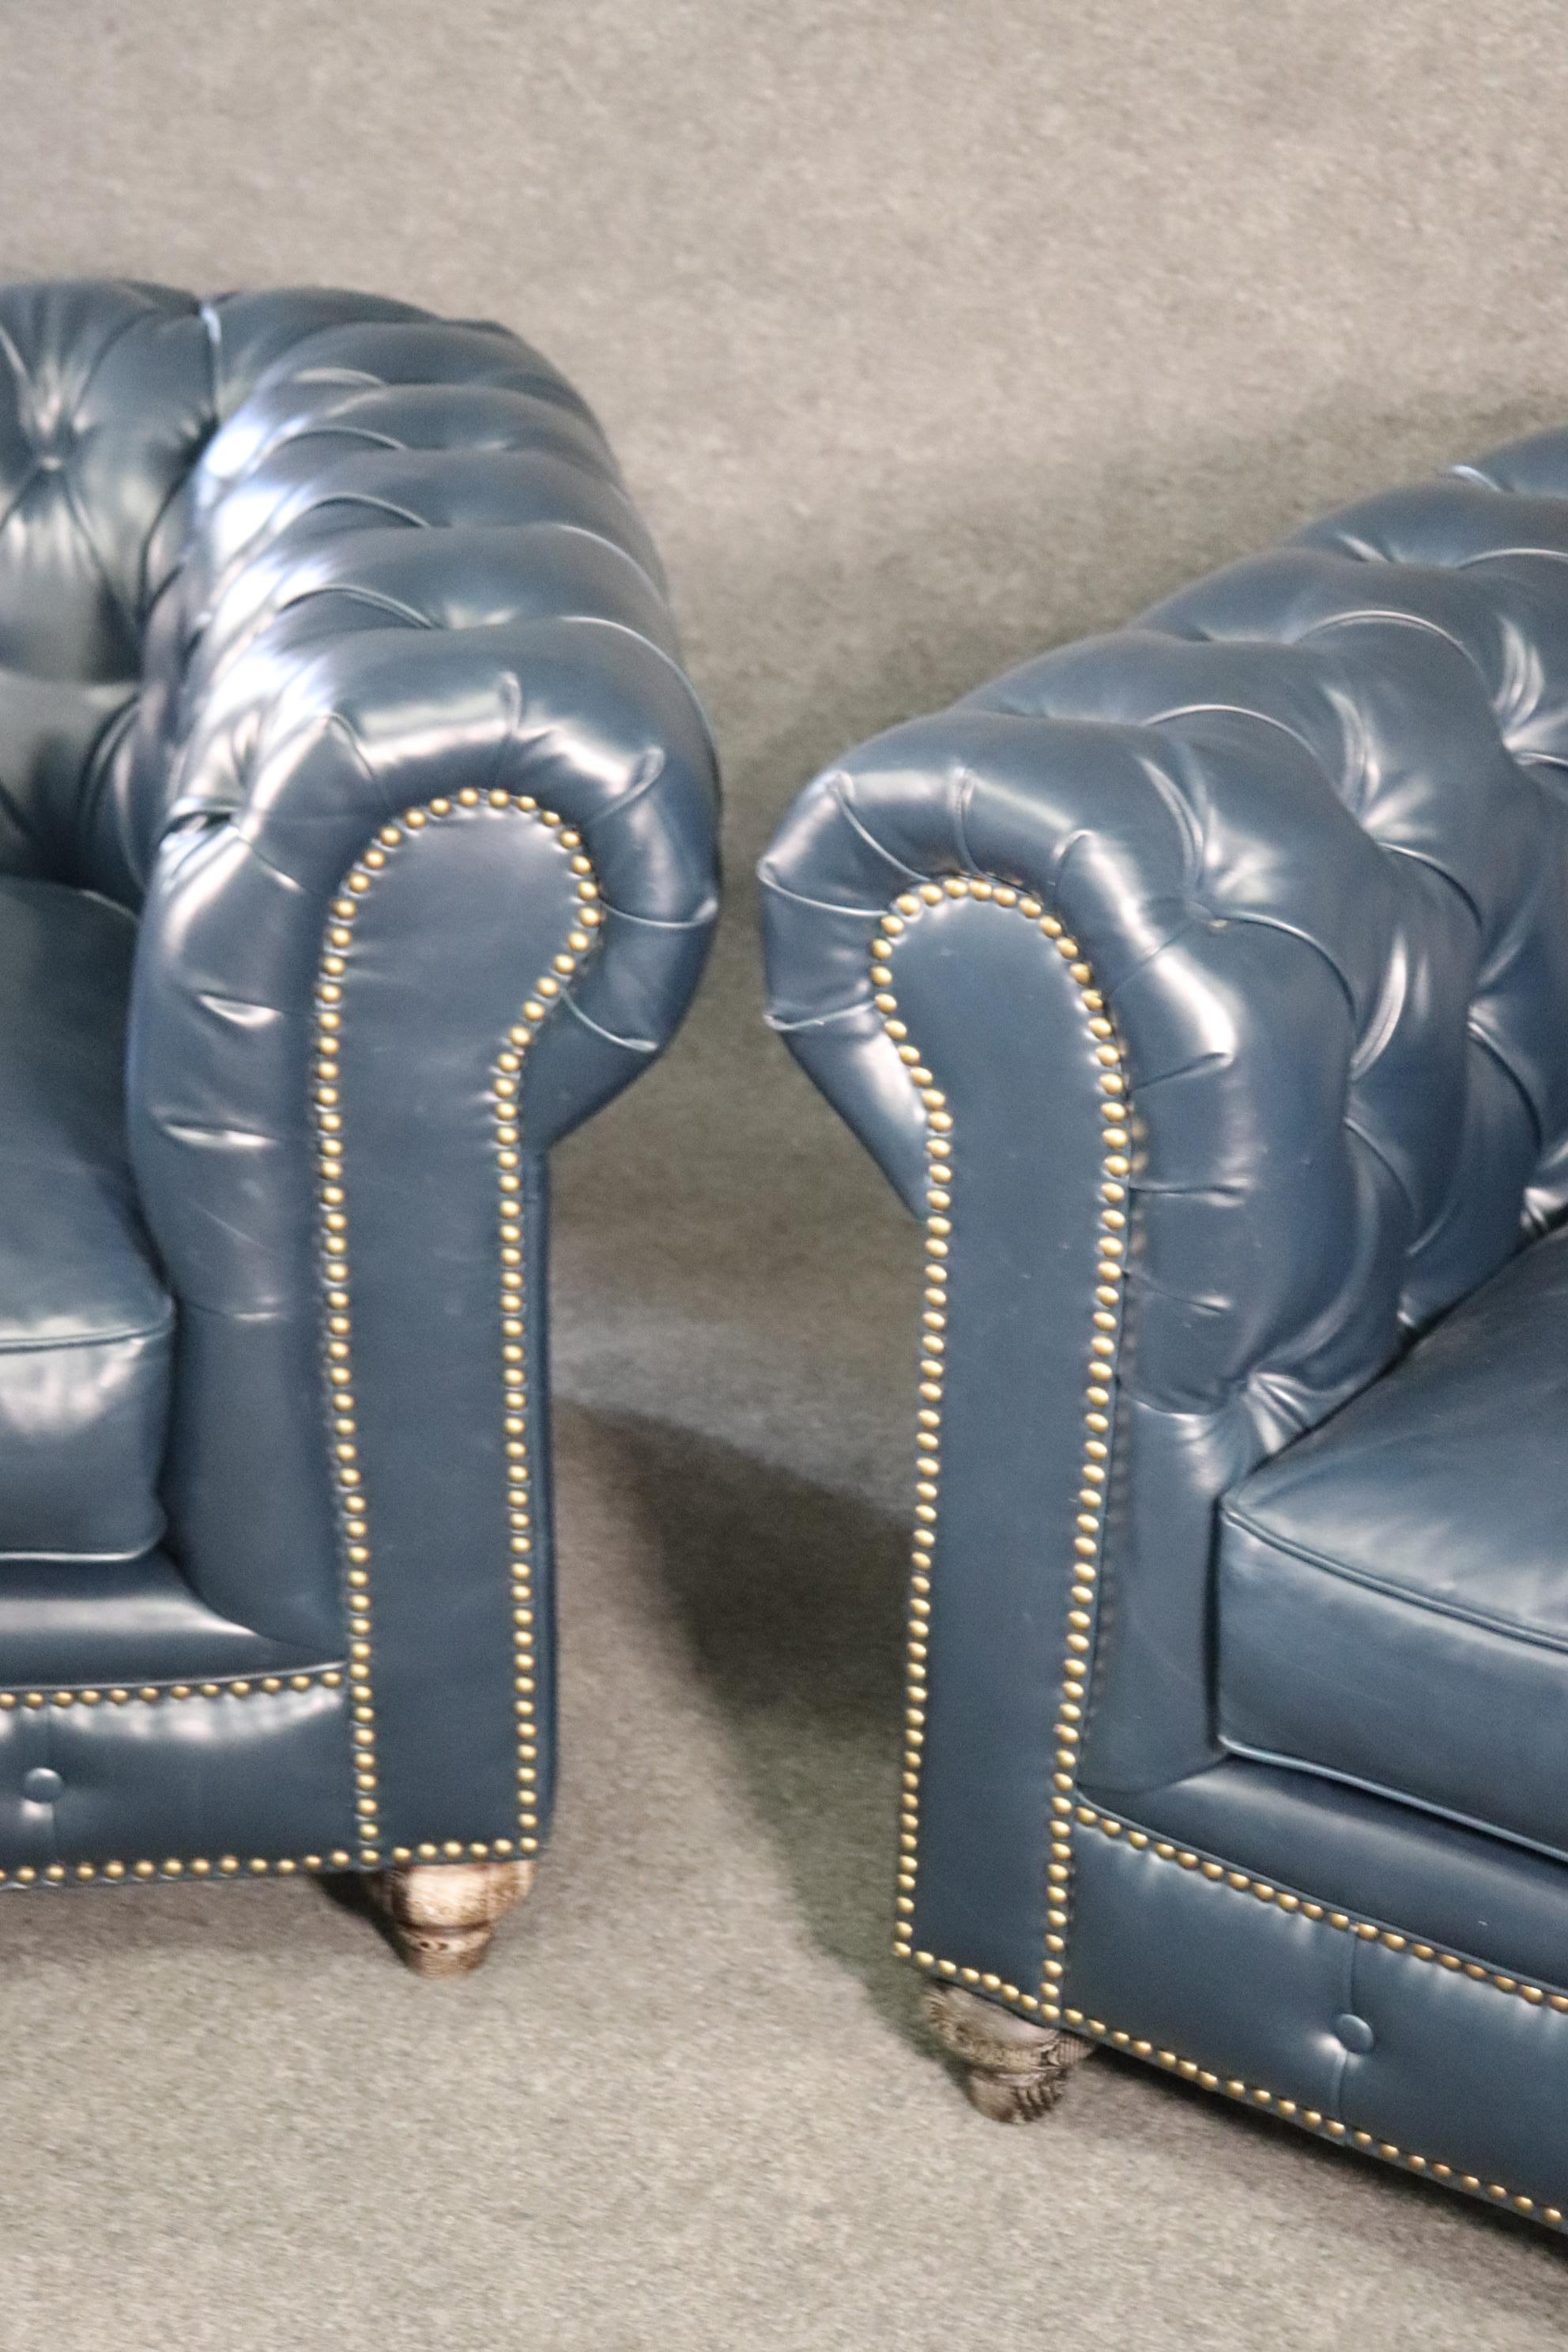 Pair High Quality Genuine Top Grain Leather Chesterfield Club Chairs Navy Blue 8